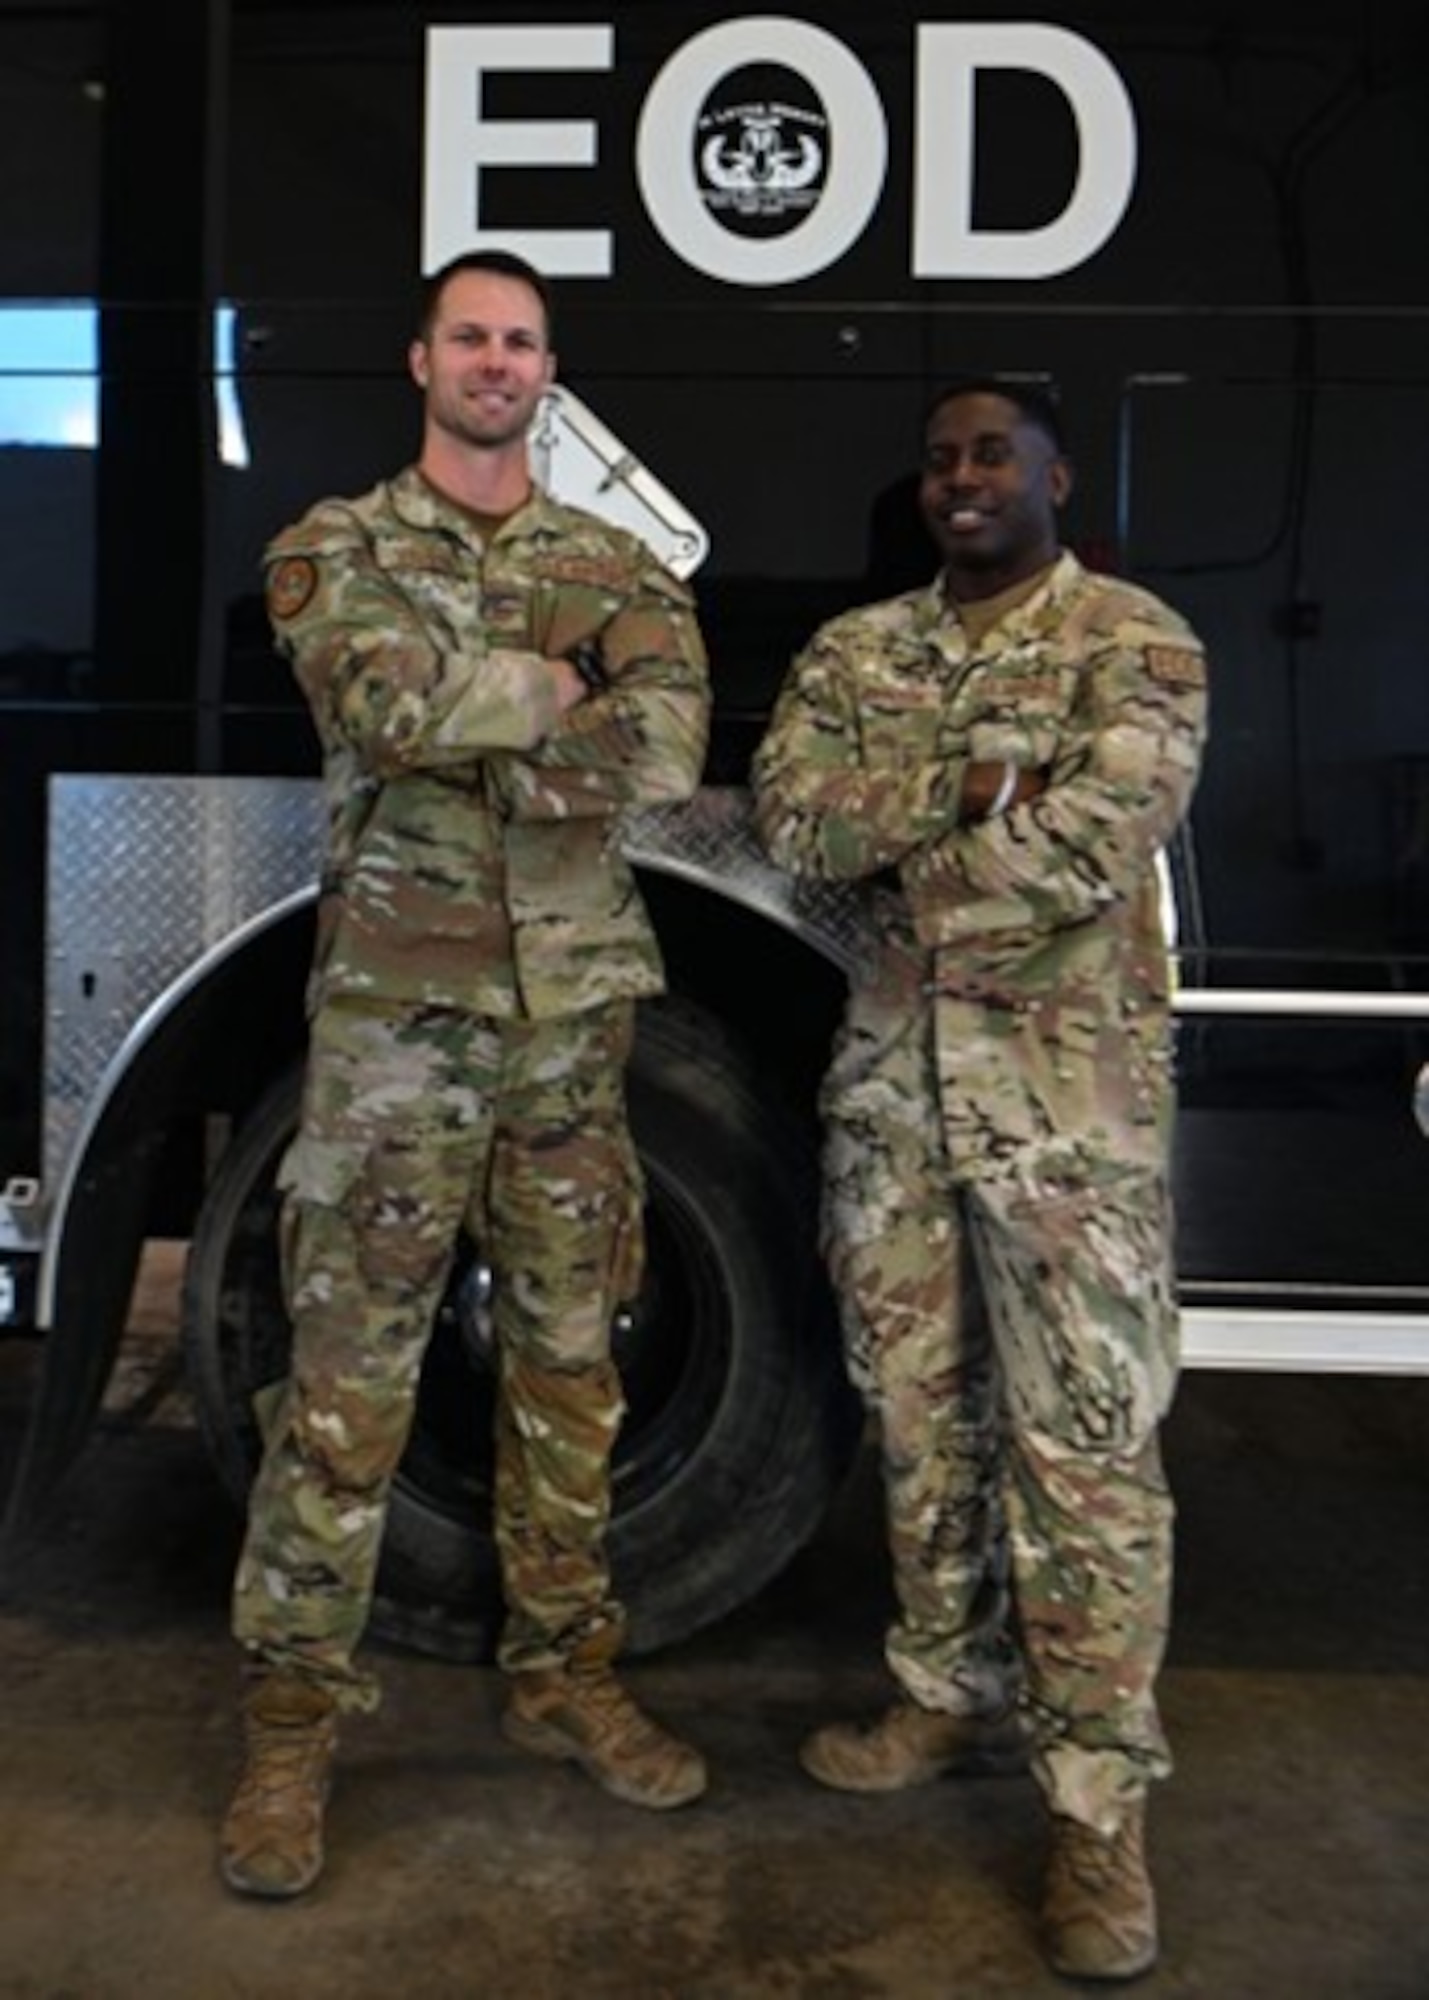 U.S. Air Force Tech. Sgt. Jonathan Vruwink, non-commissioned officer in charge of the 30th Civil Engineer Squadron Explosive Ordnance Disposal (EOD) flight’s logistics, and U.S. Air Force Senior Airman Dayton Johnson, EOD team member, pose in front of the flight’s Bomb Squad Emergency Response Vehicle at Vandenberg Space Force Base, Calif., March 7, 2023. Vruwink and Johnson earned EOD MasterBlaster of the Year awards from the U.S. Space Force in 2022. This annual award recognizes outstanding performers in the EOD career field. (U.S. Space Force photo by Airman 1st Class Kadielle Shaw